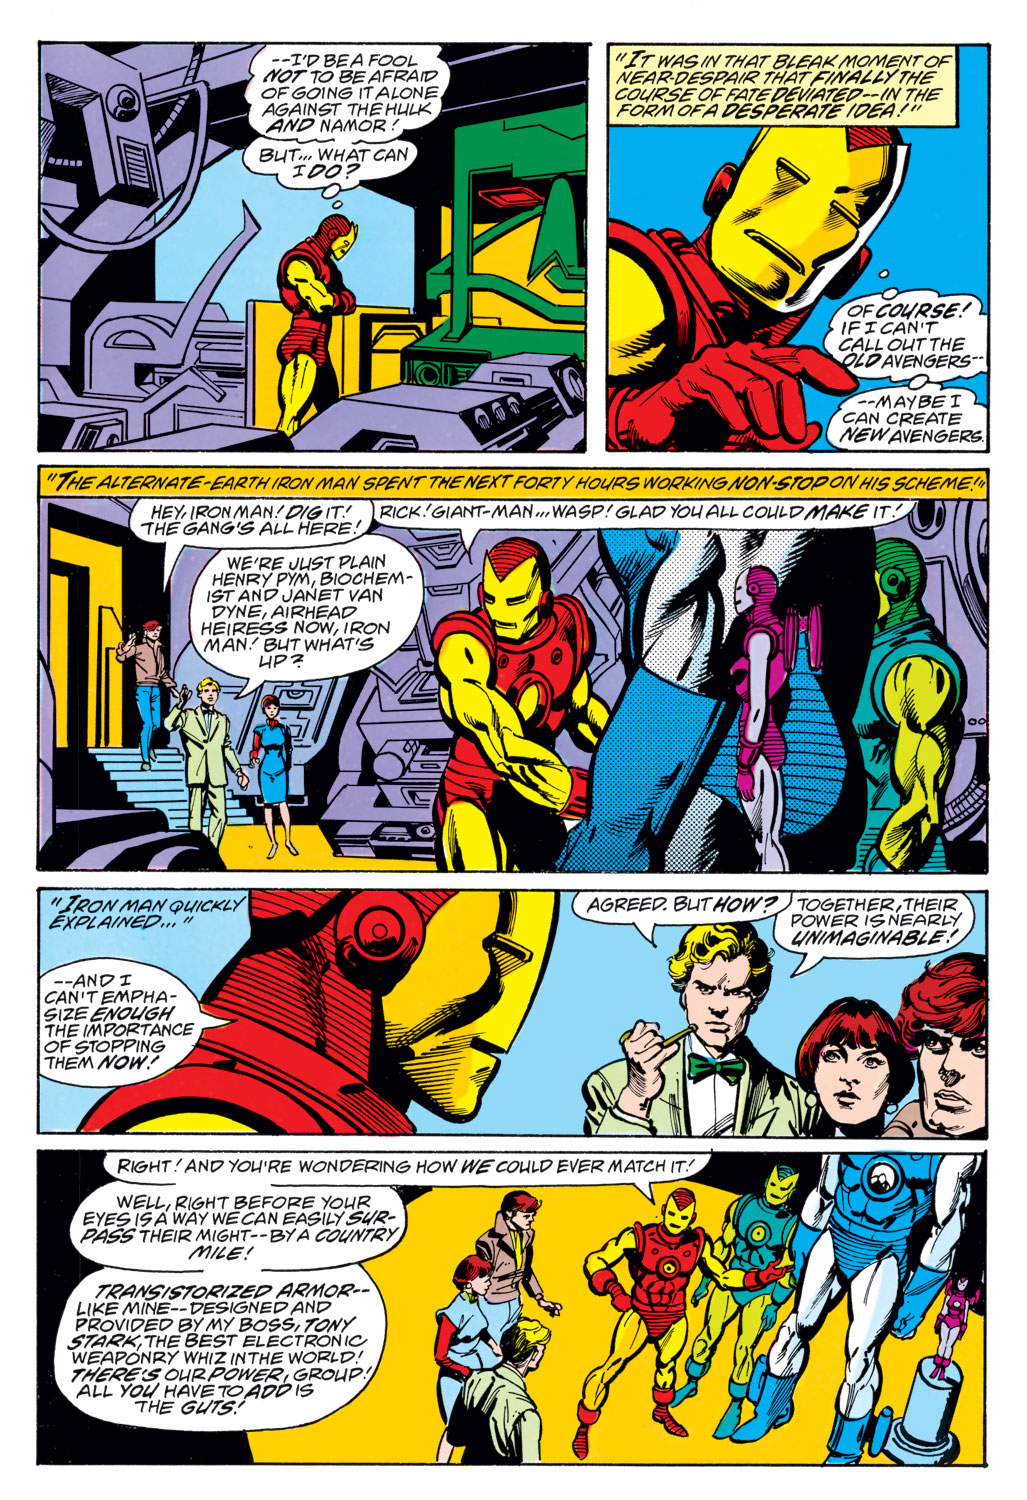 What If? (1977) issue 3 - The Avengers had never been - Page 11